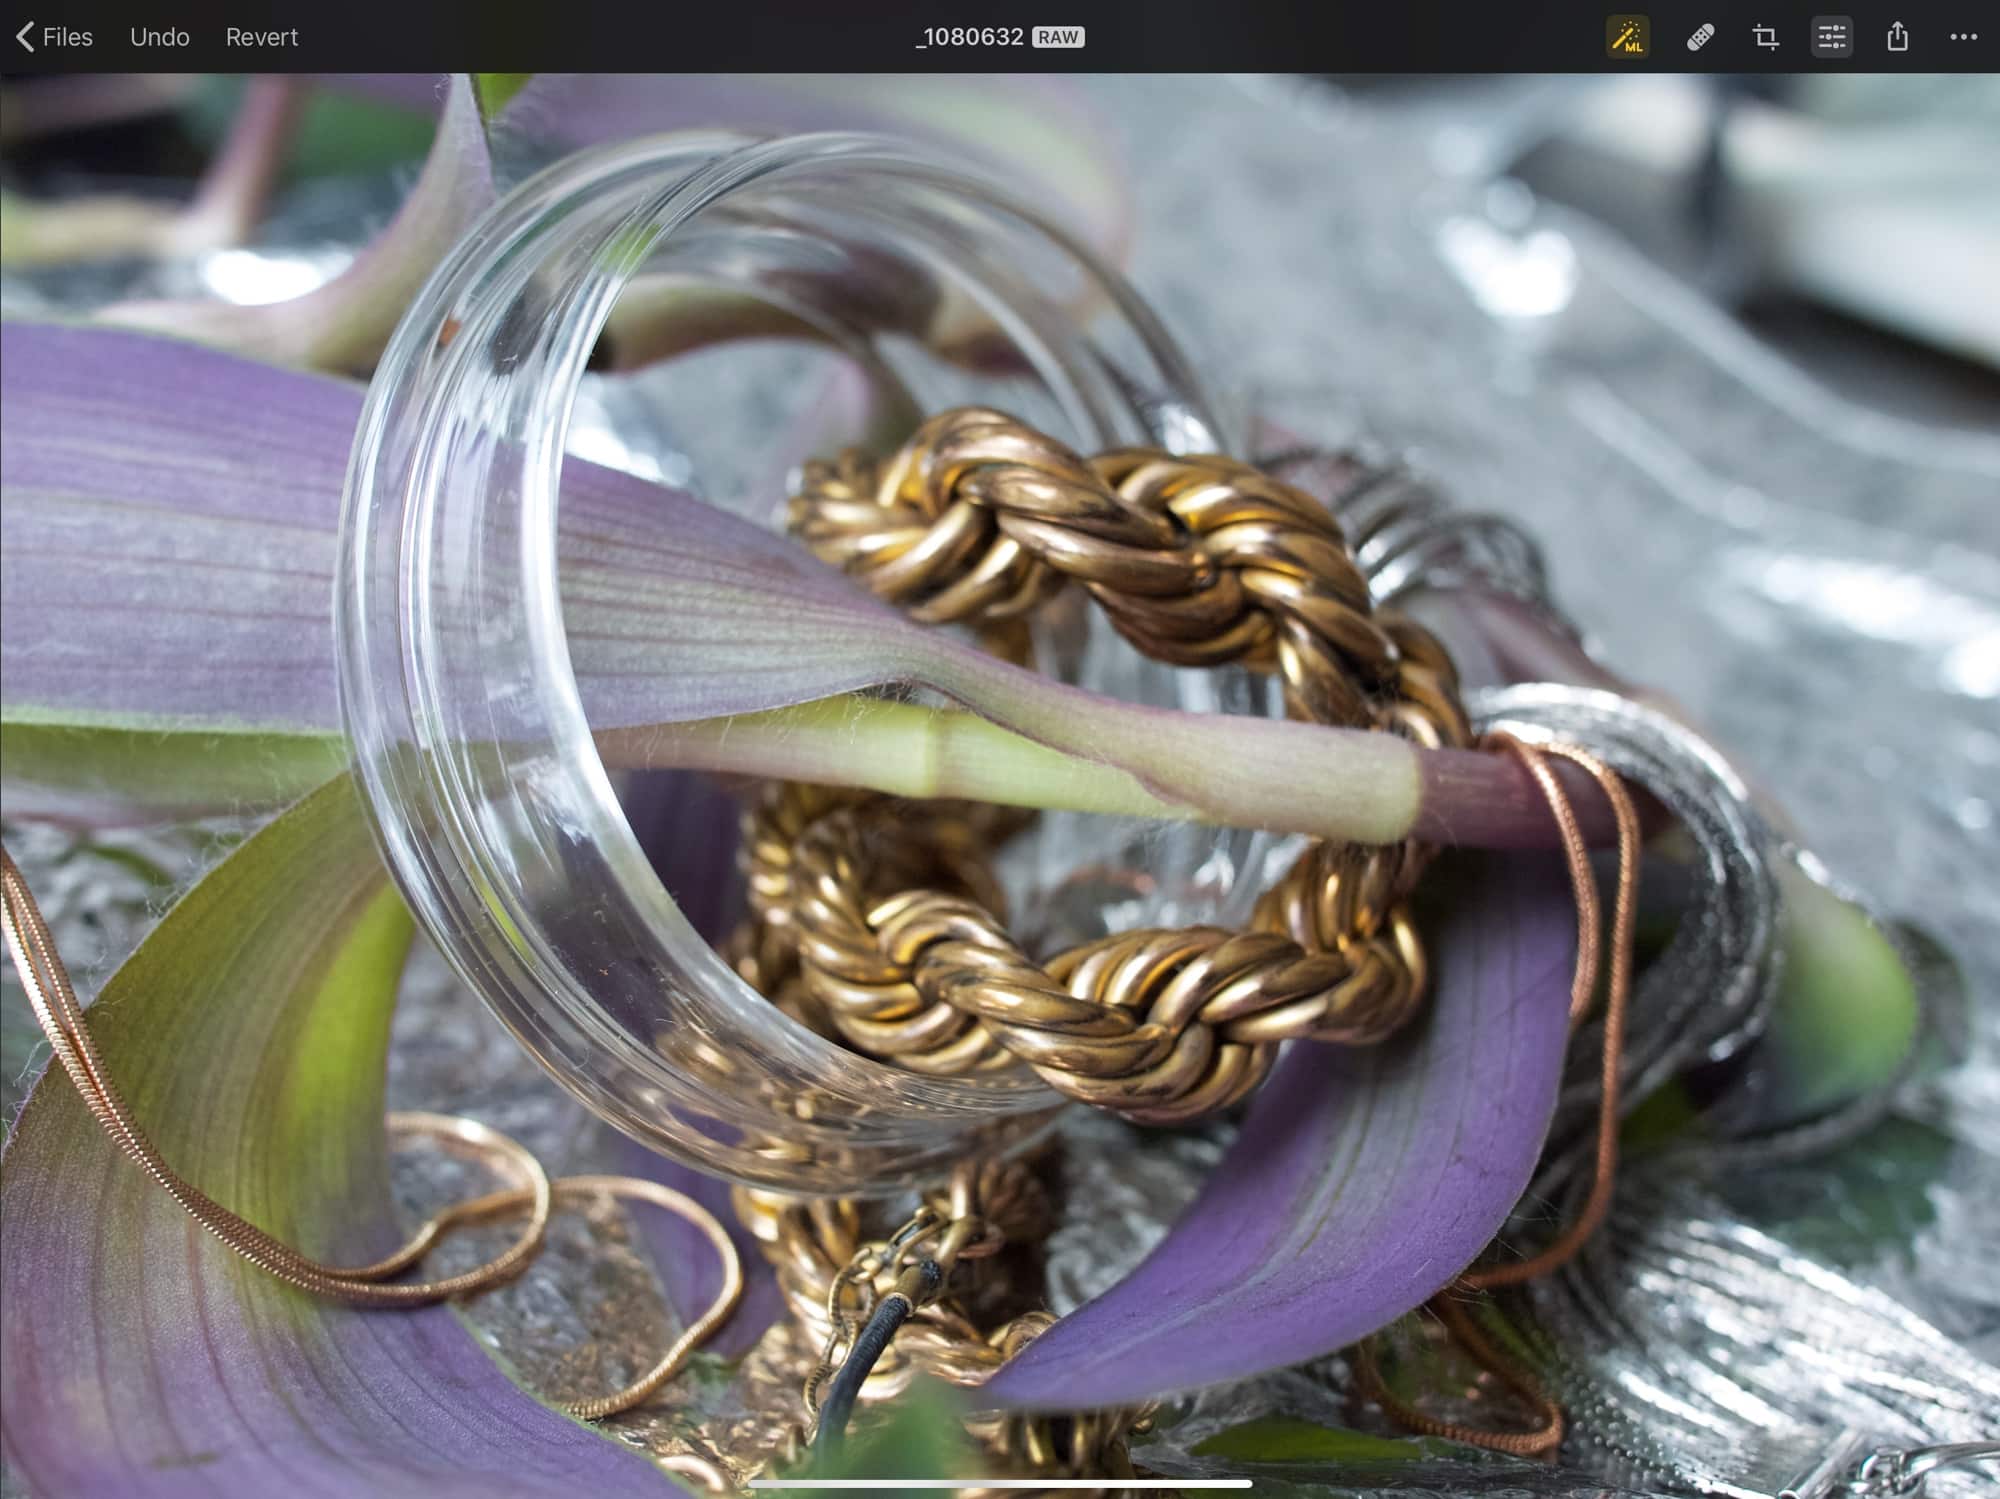 Machine Learning is everywhere in Pixelmator Photo.